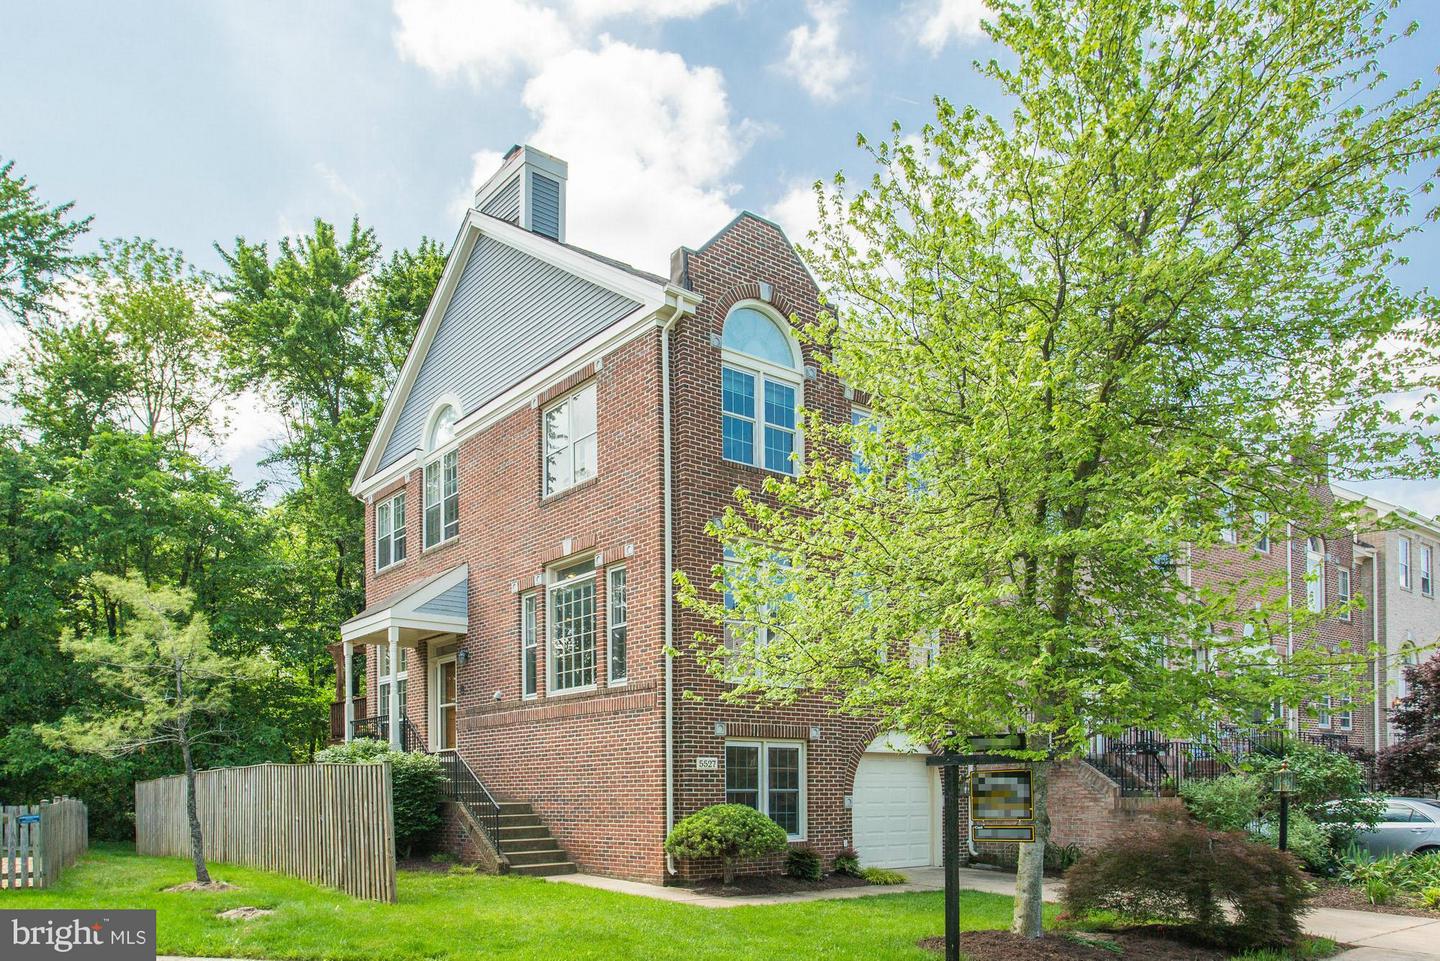 View CENTREVILLE, VA 20120 townhome